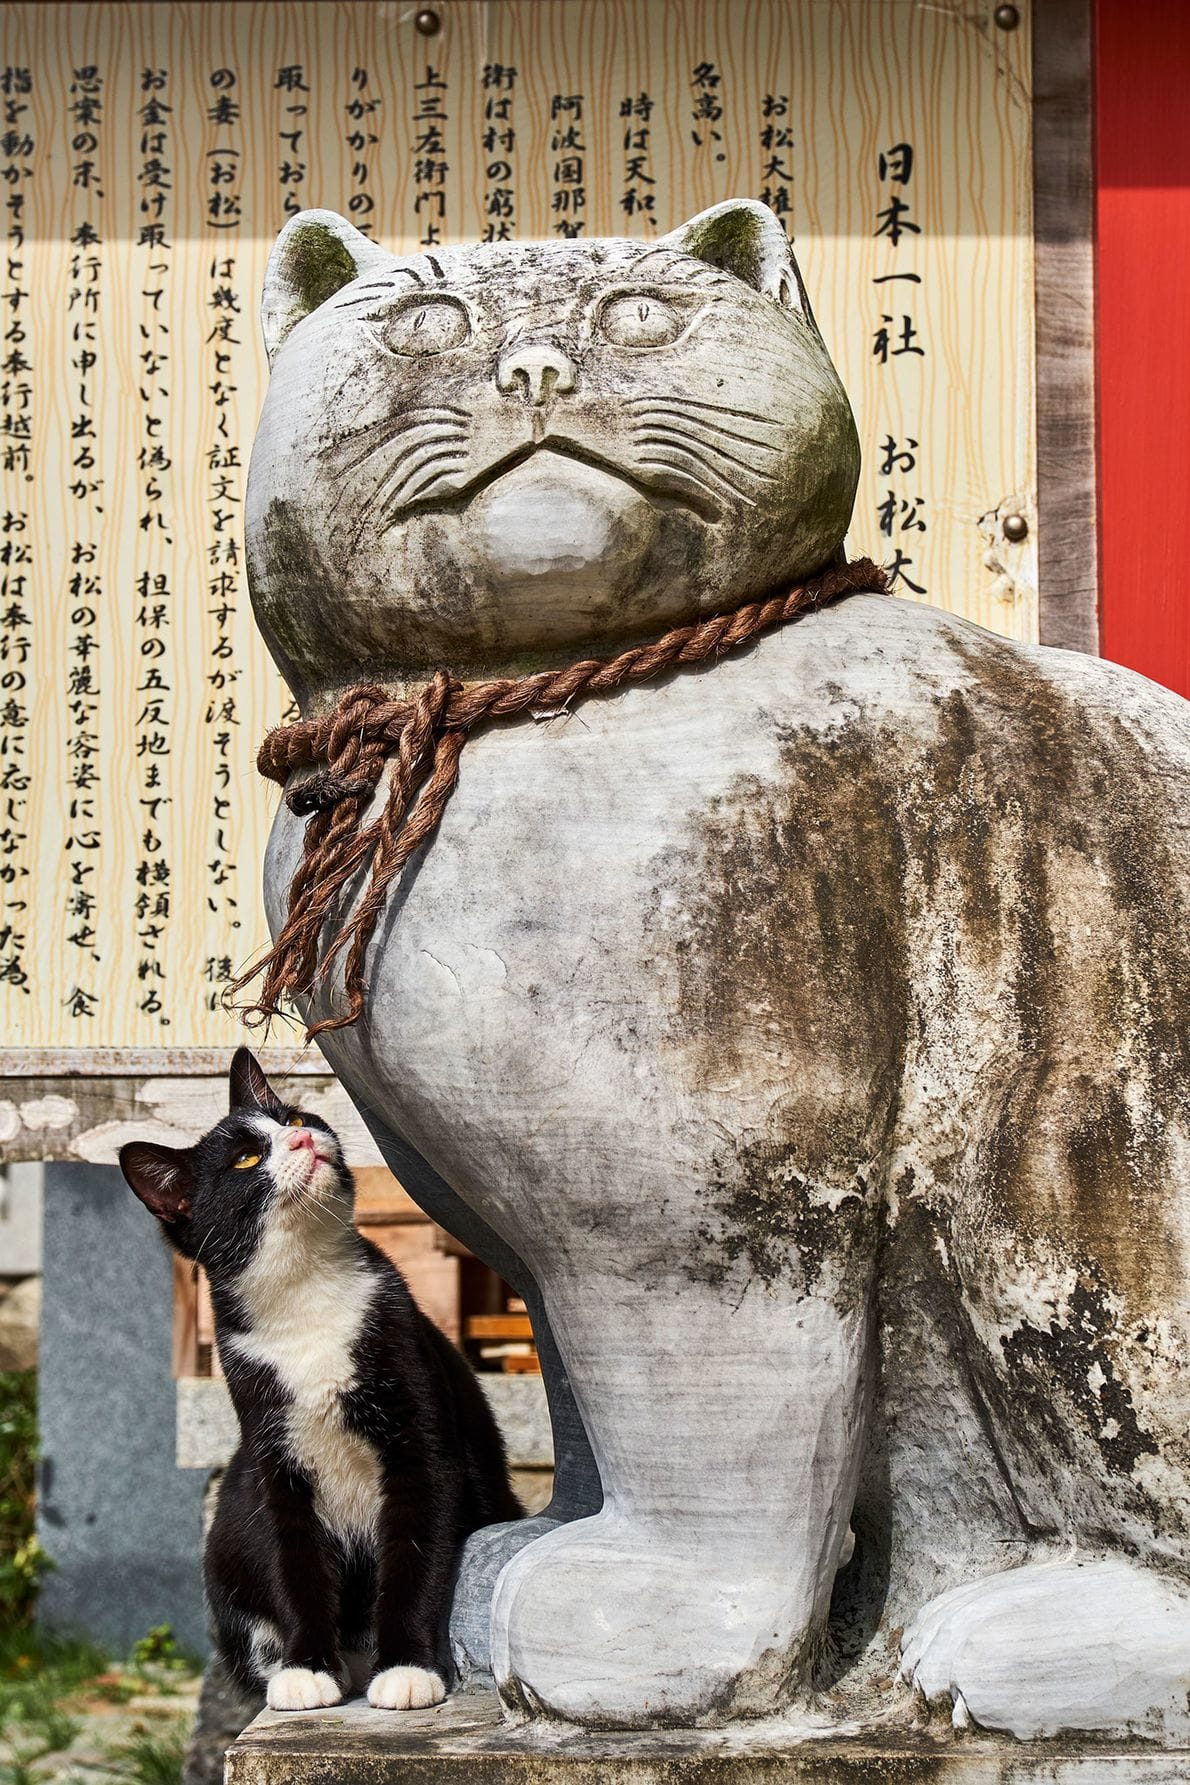 Black and White Cat looking Up at a Cat Statue